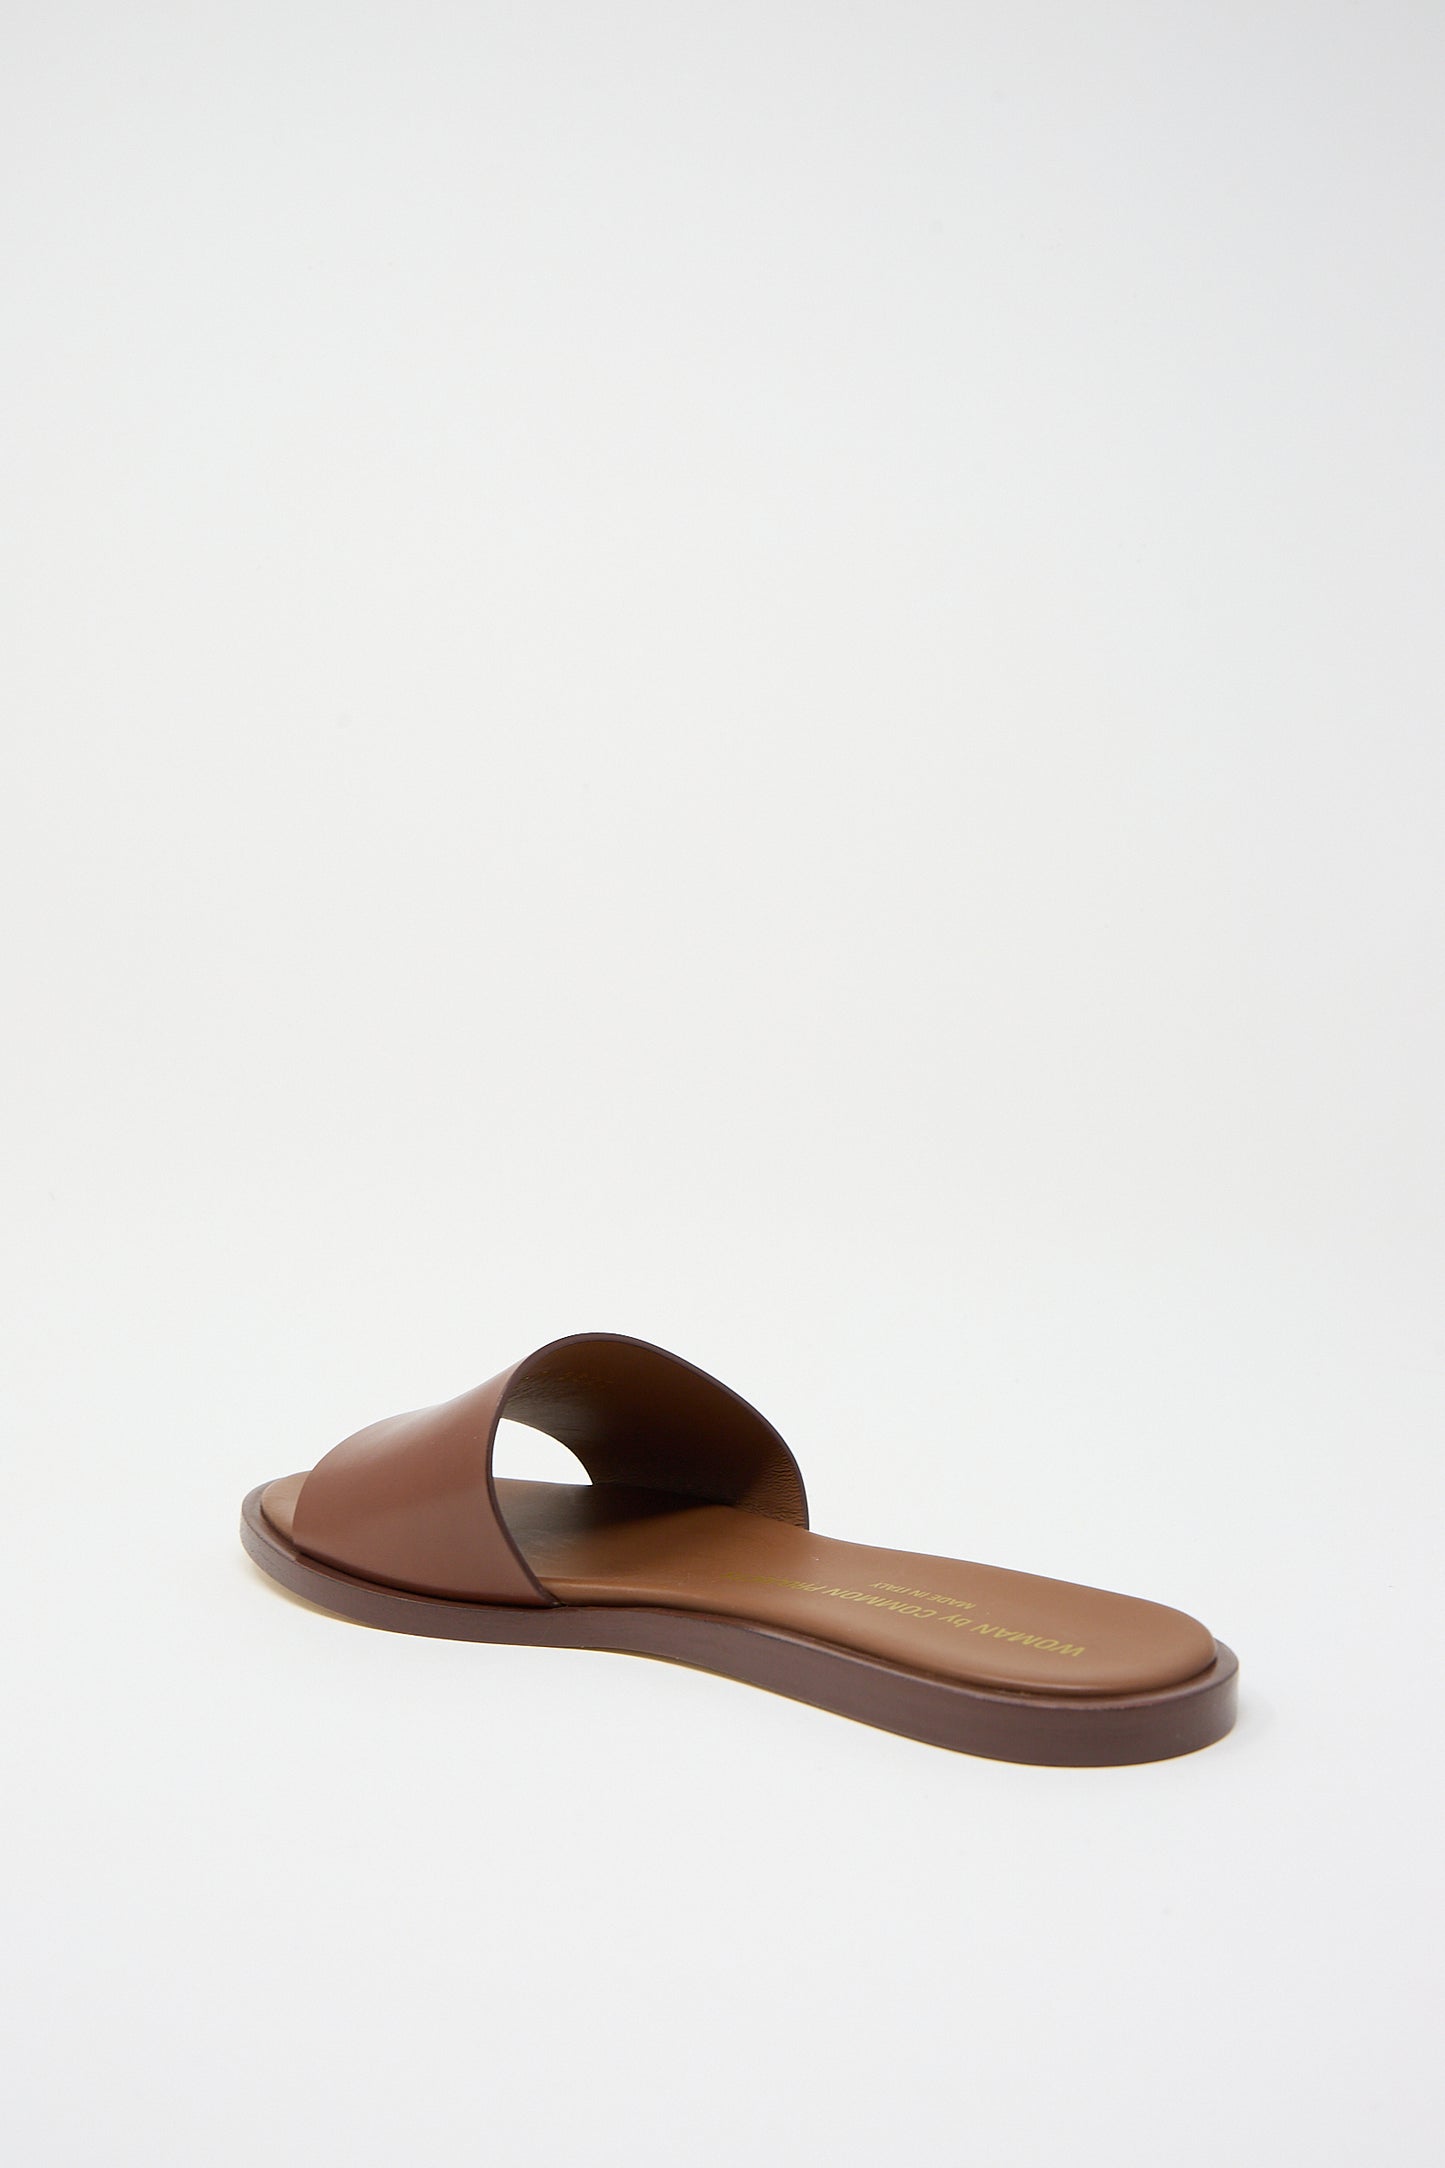 Luxury footwear: Common Projects Leather Slide 6155 Sandal in Brown on a white background.